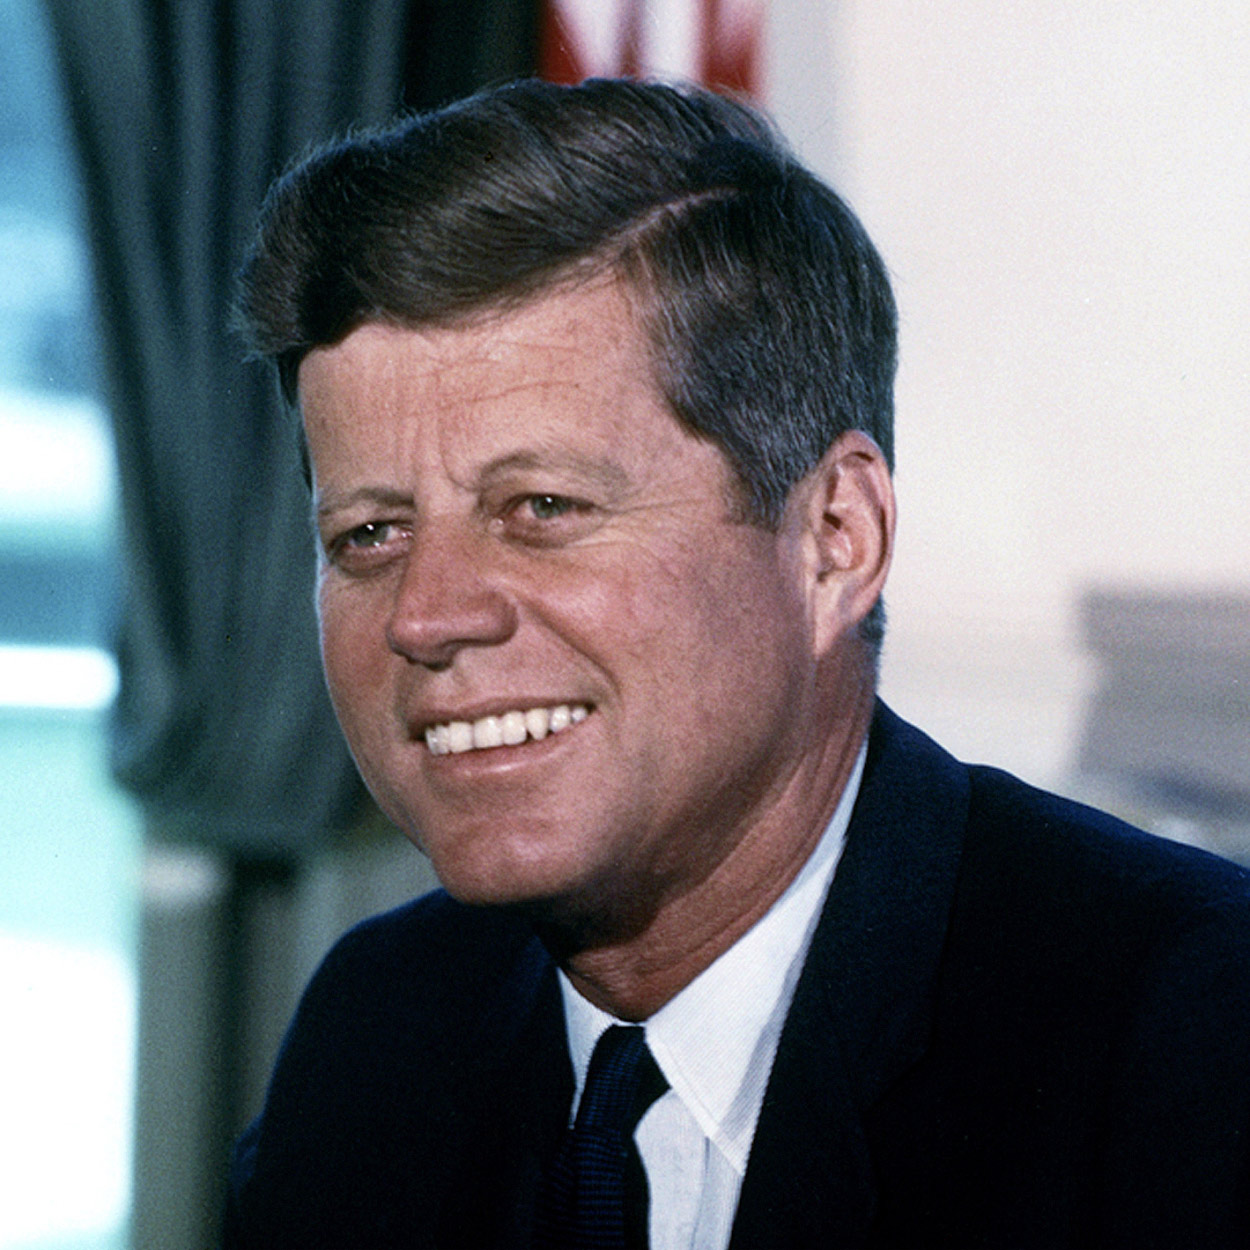 taille-john-fitzgerald-kennedy-Image